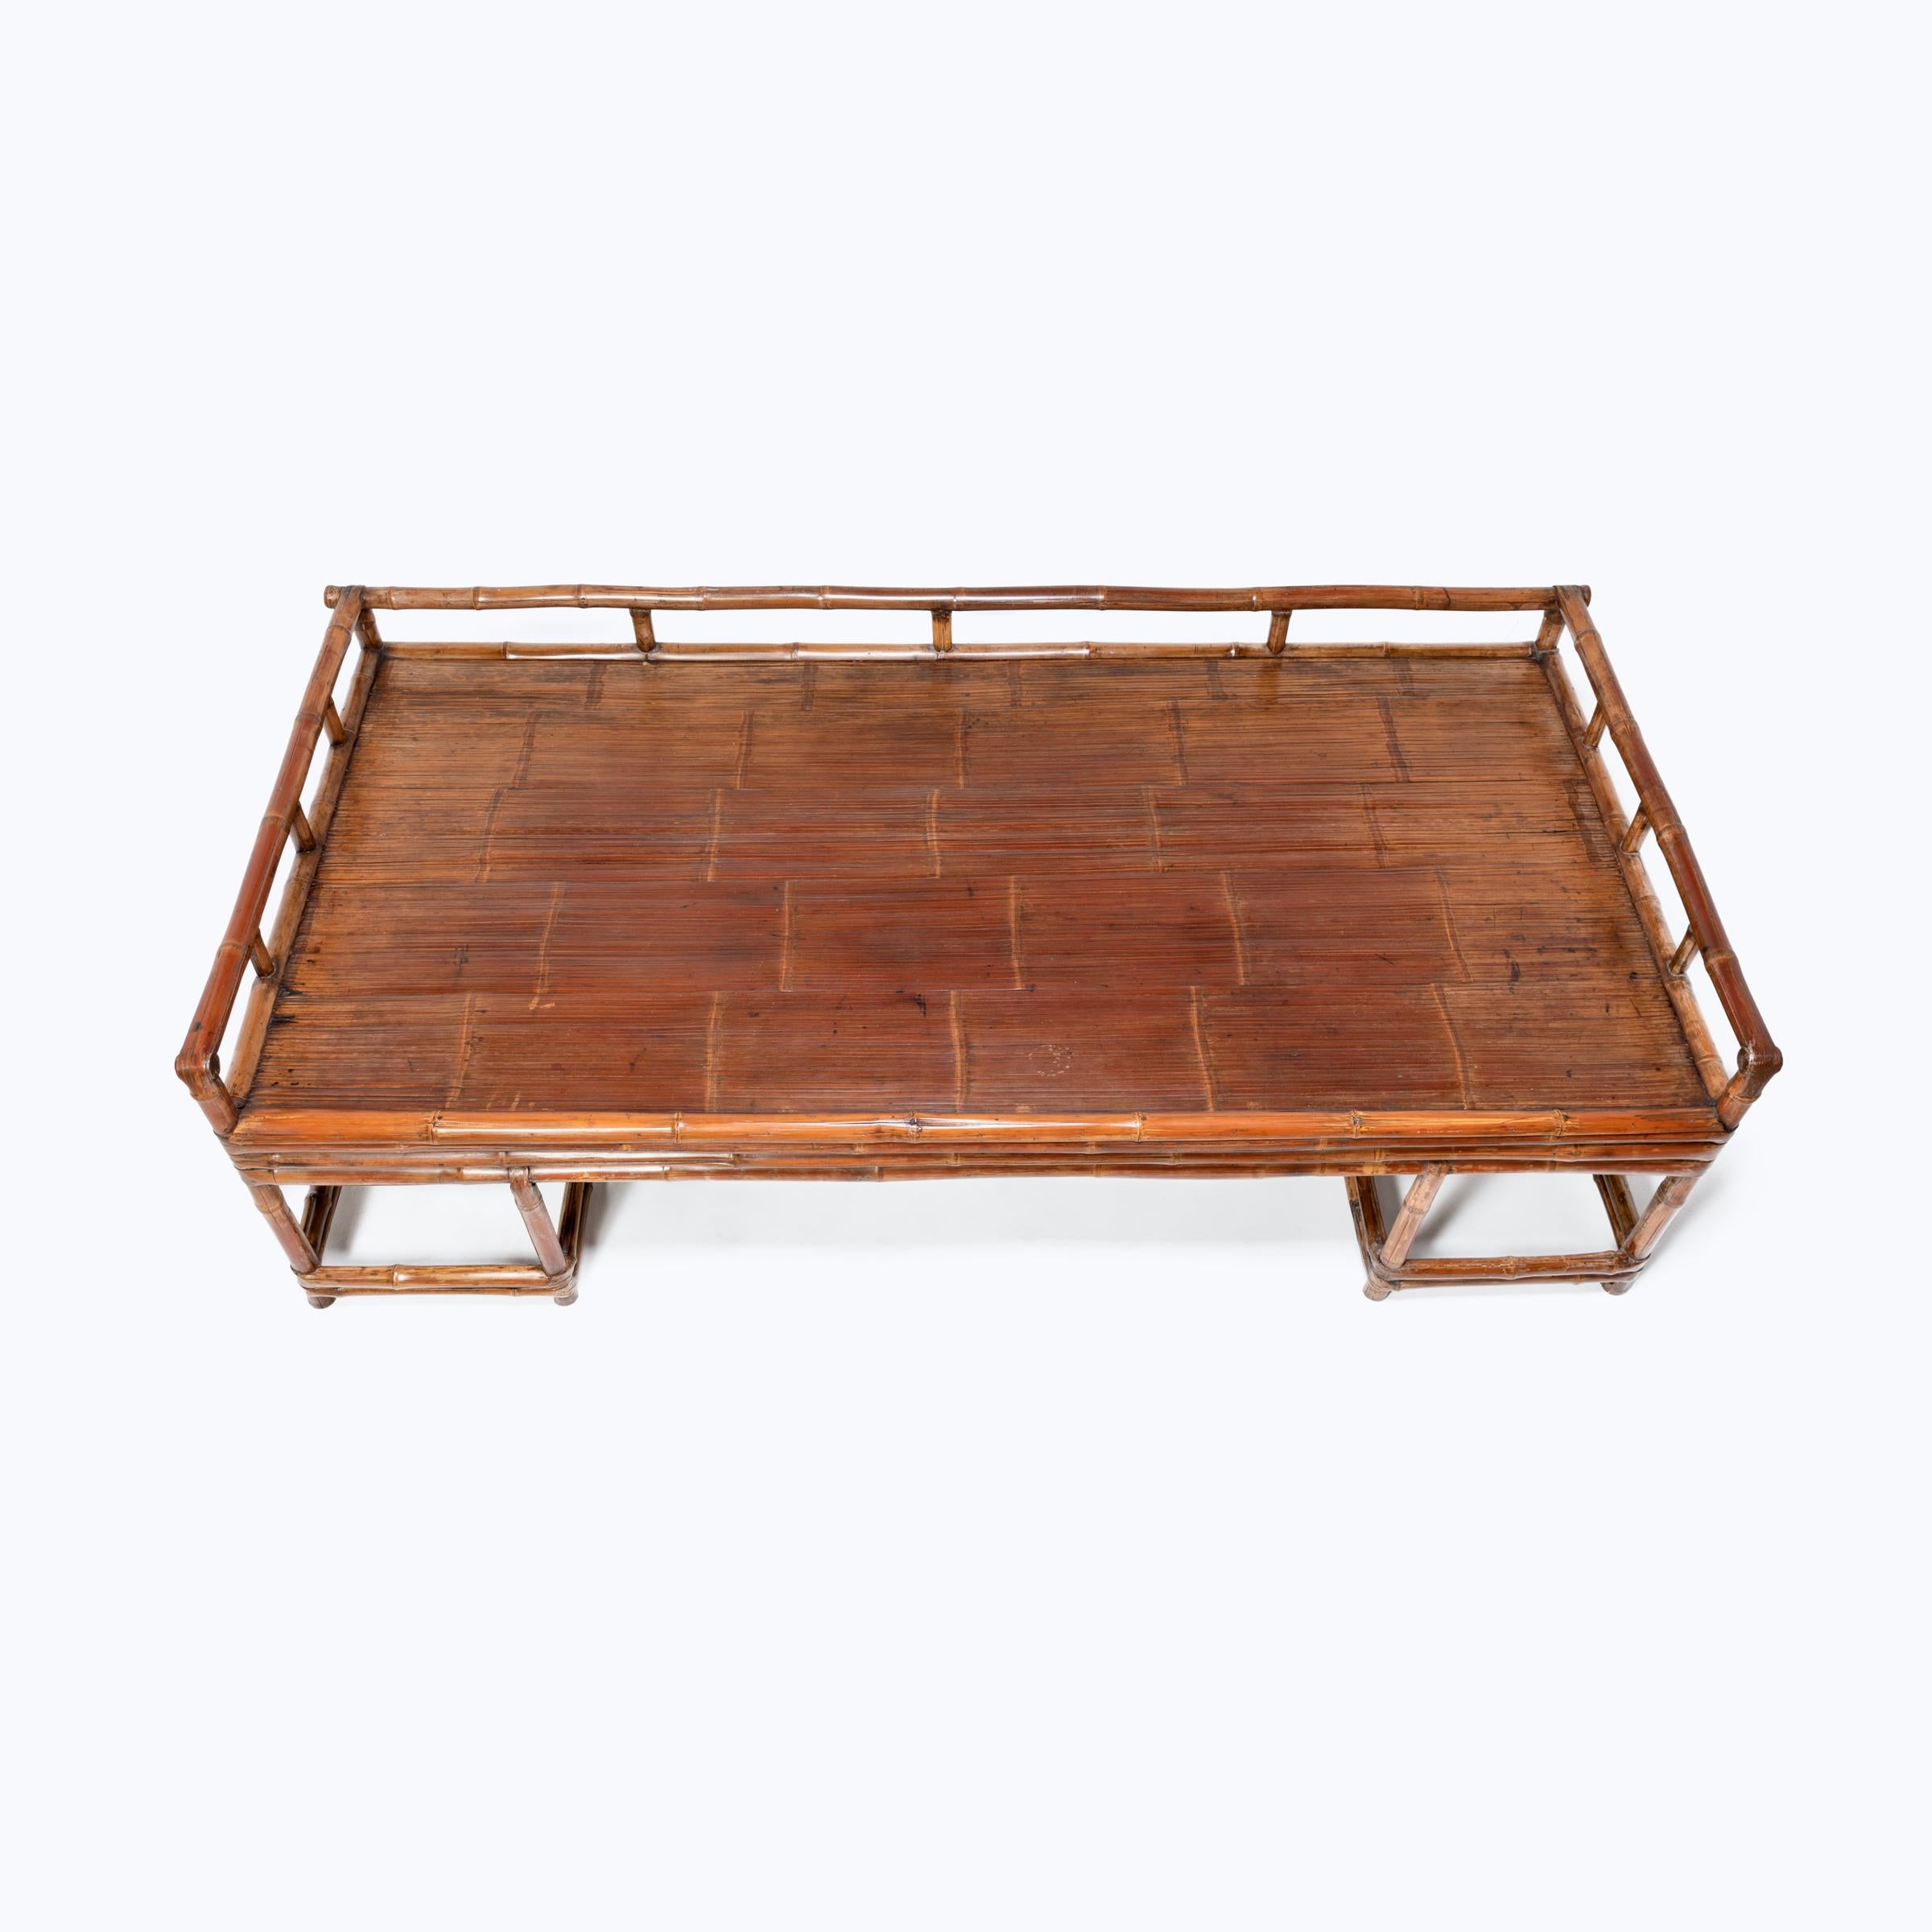 Made of bent bamboo, this southern Chinese daybed was likely the most popular piece of furniture in house. Lightweight and portable, the platform bed travelled from room to room and was even brought outdoors during the region’s sultry summers. Low